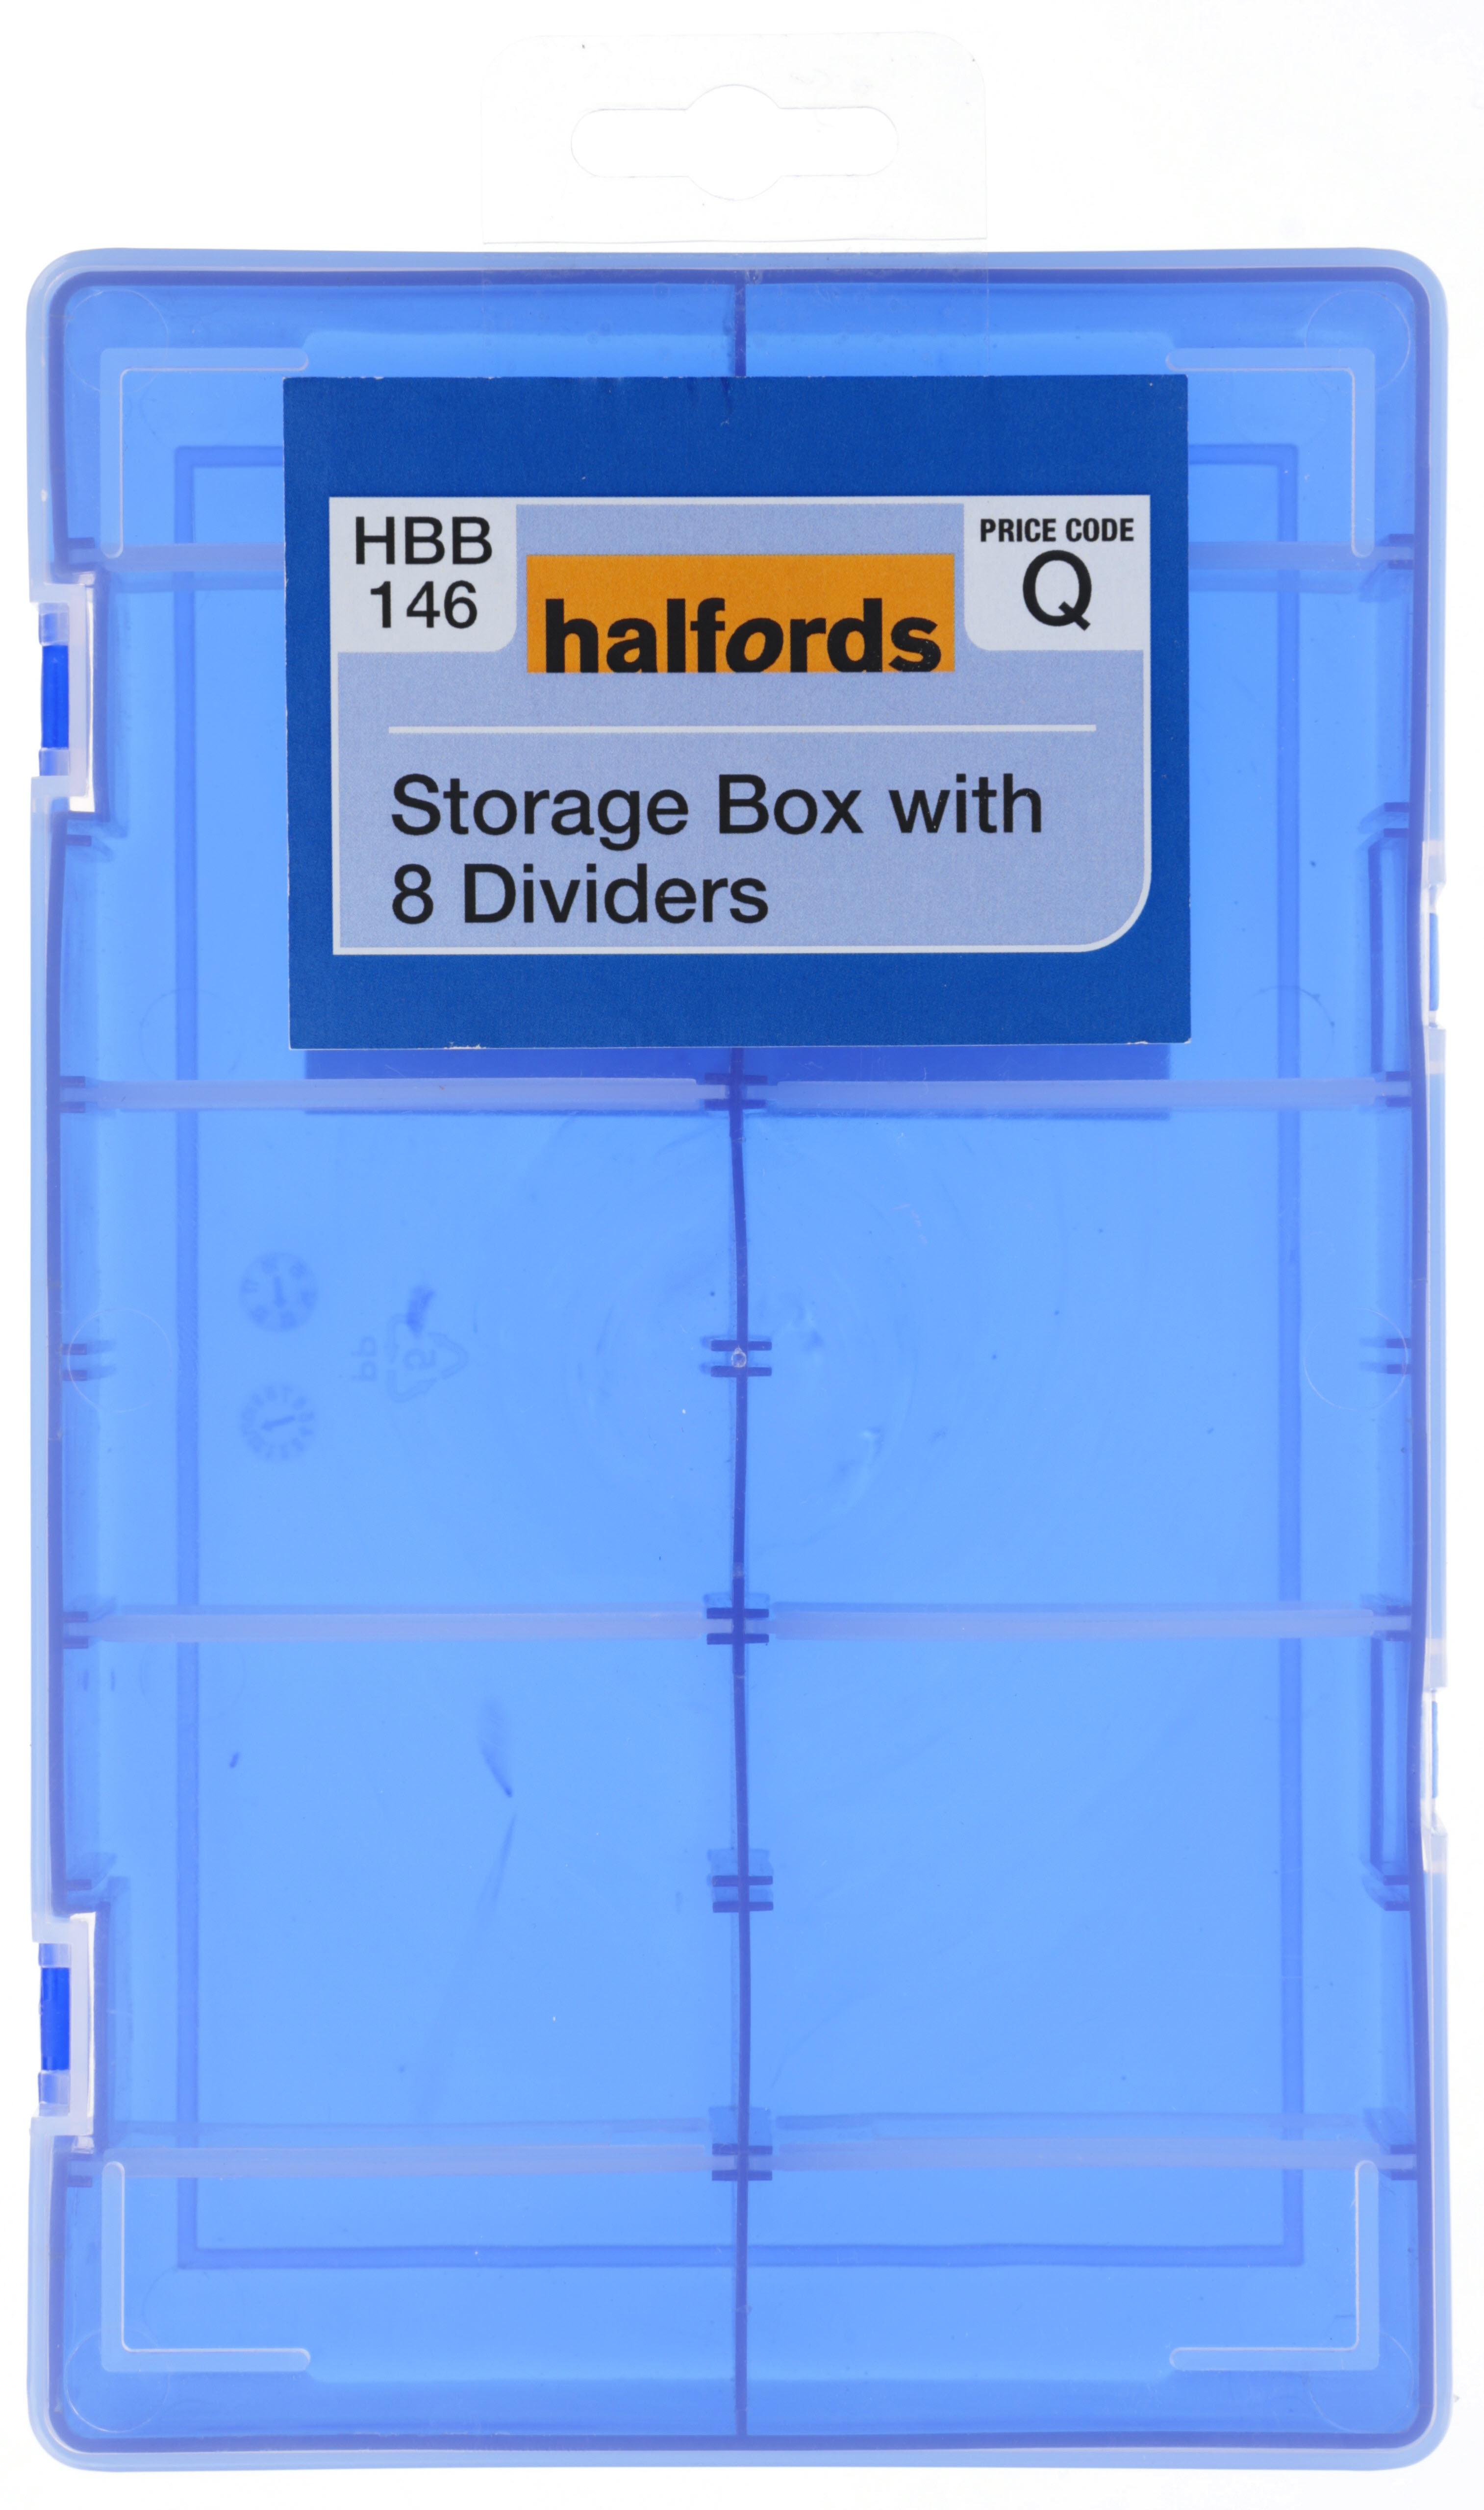 Halfords Storage Box With 8 Dividers Hbb146